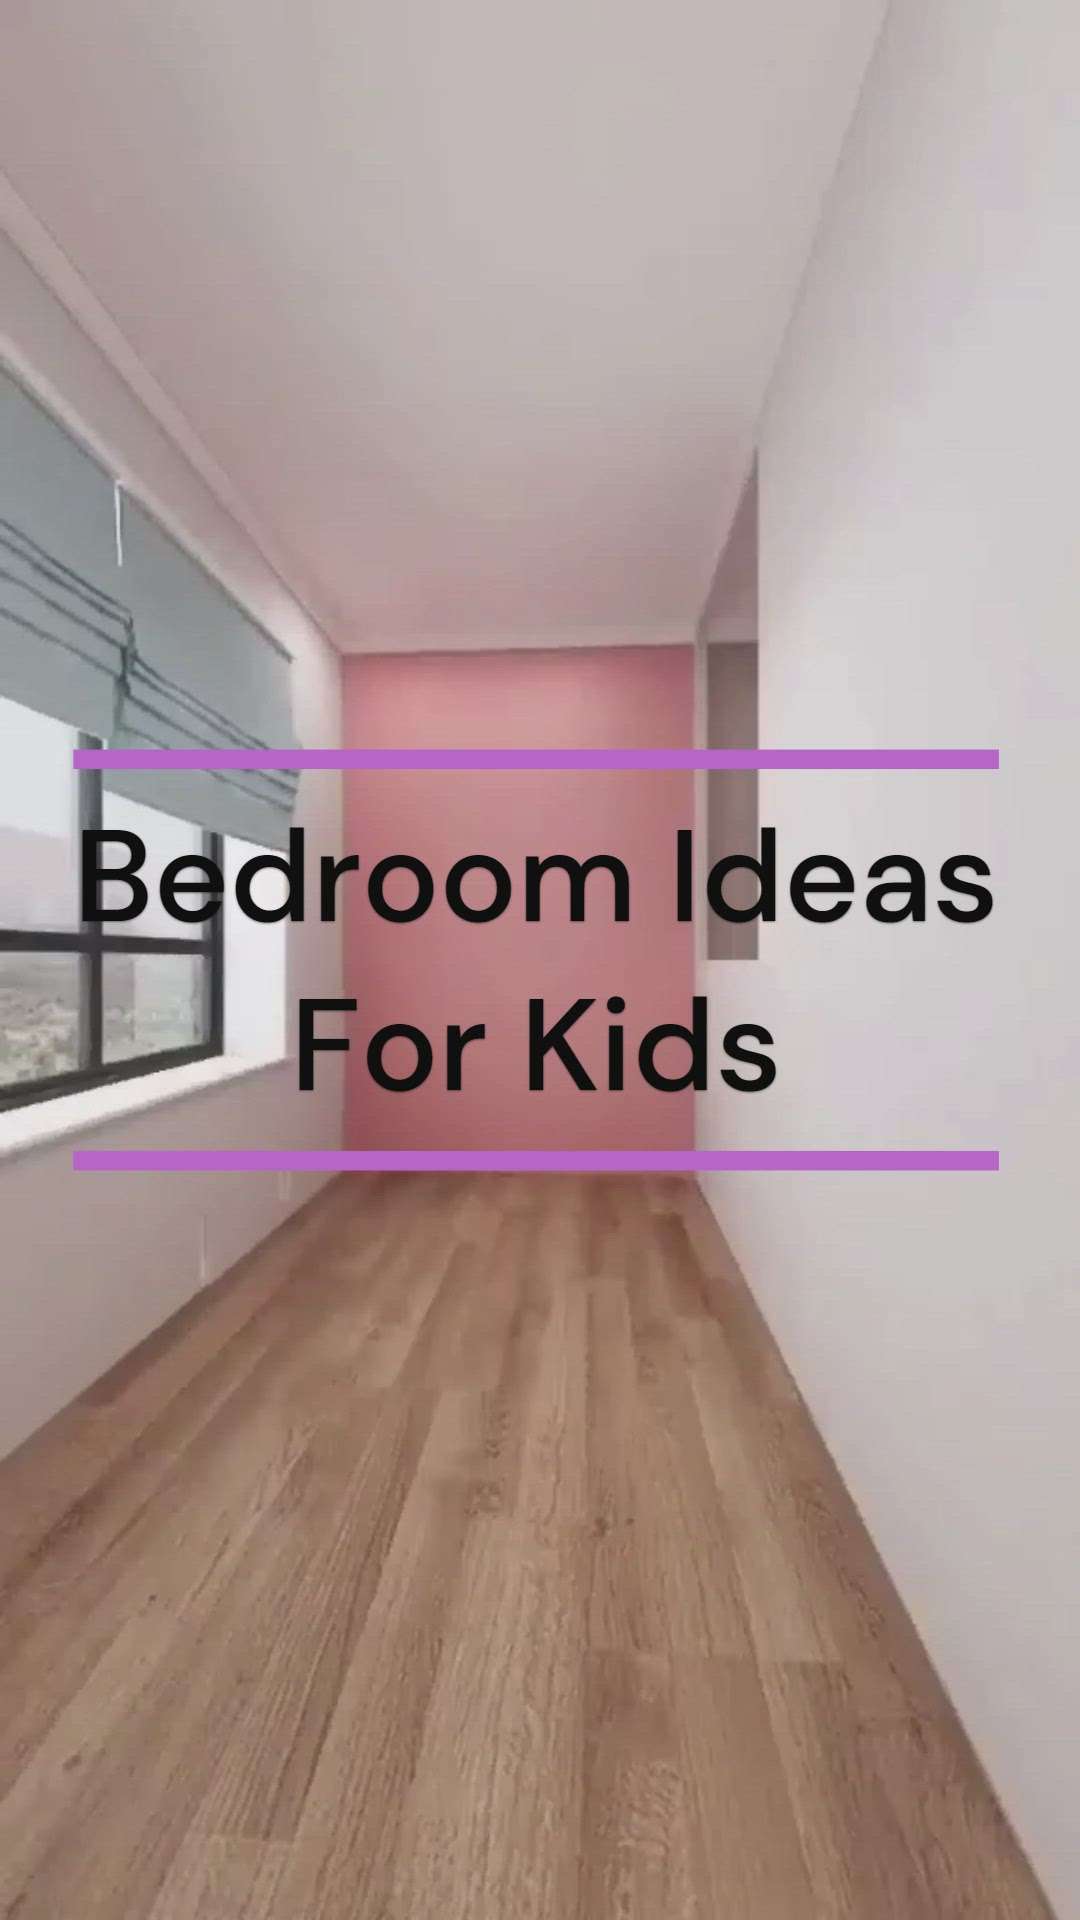 "Crafted with care: Inspiring kids' bedroom ideas that spark imagination ✨ #CraftedForKids #CreativeSpaces #DreamyDesigns 🛏️🎨"